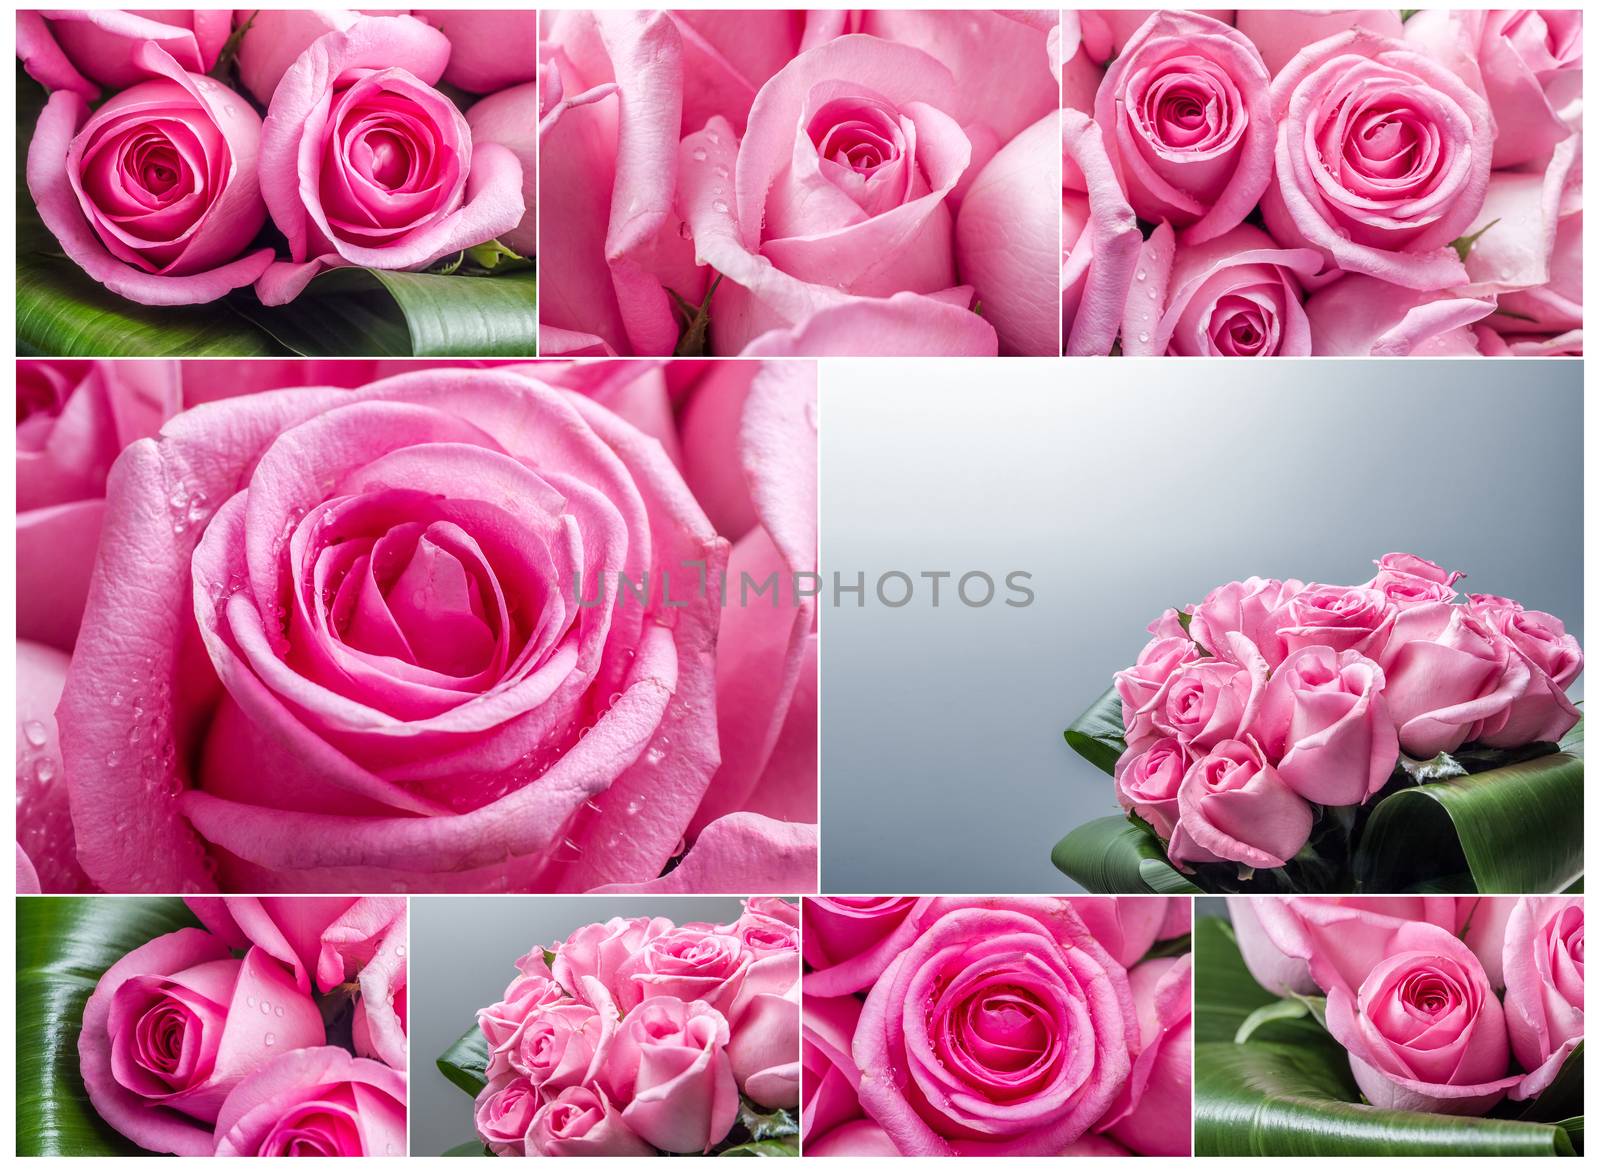 Roses collage by dynamicfoto